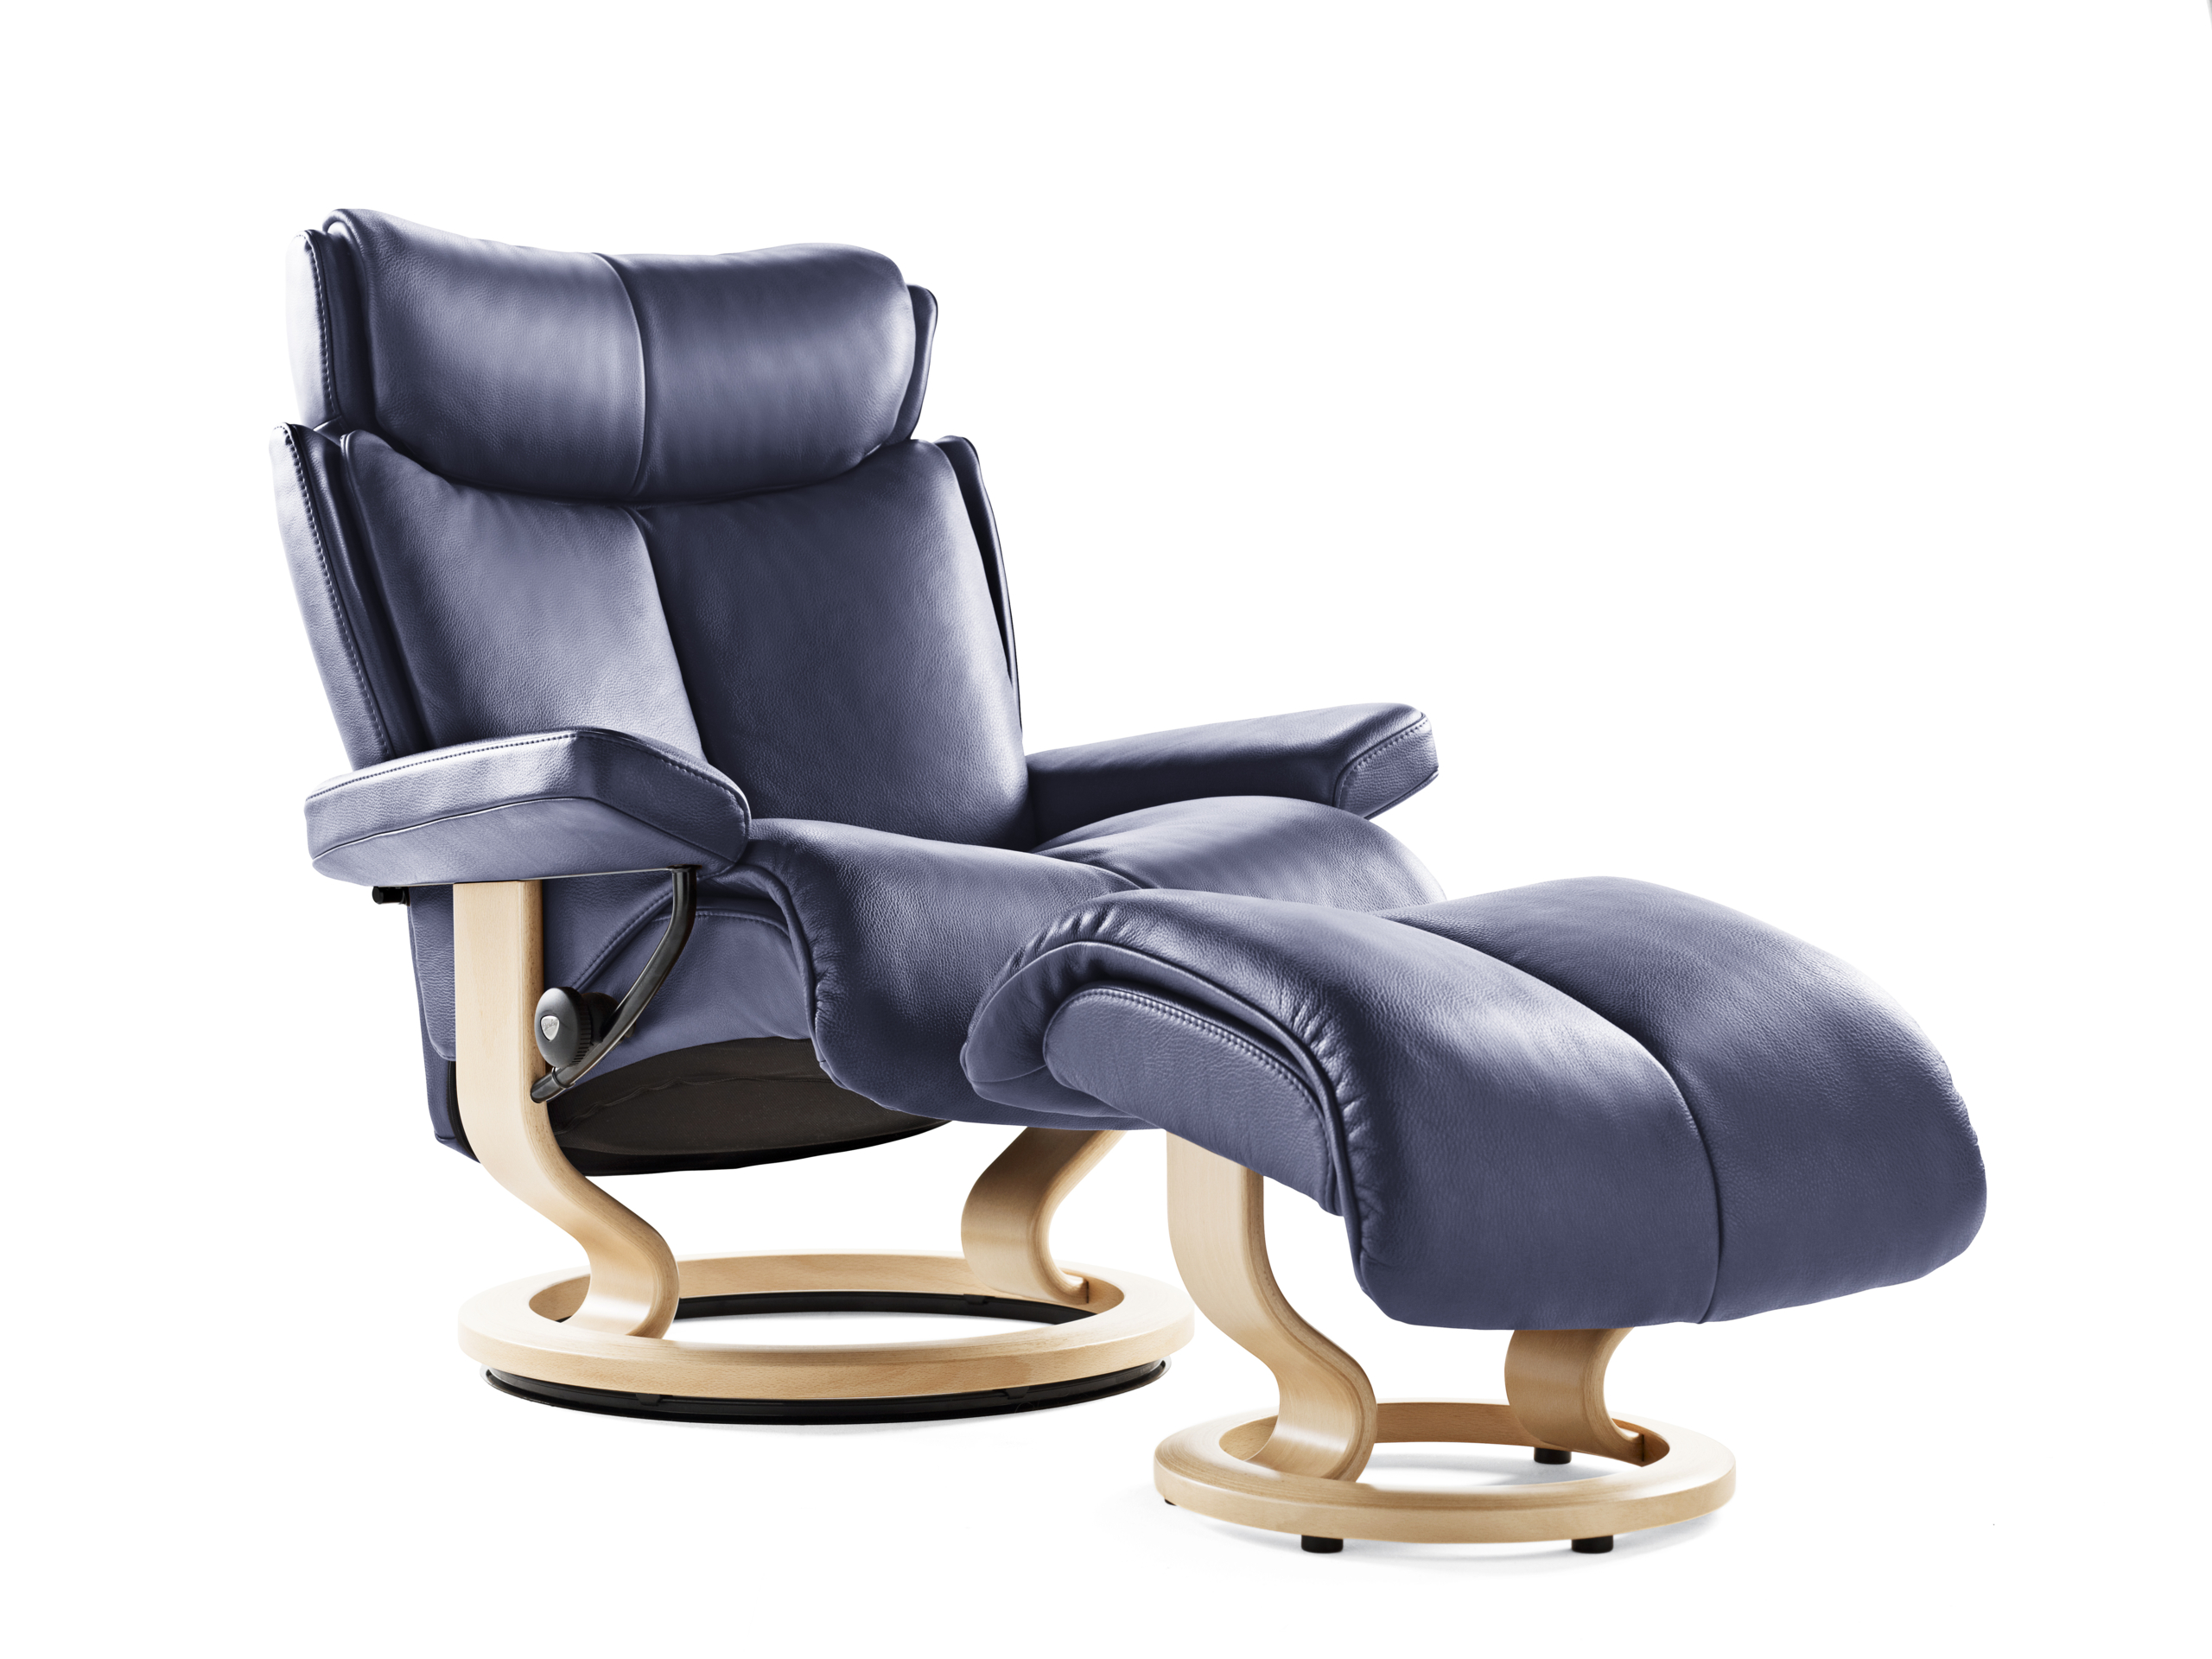 Leather recliner chair with ottoman 16